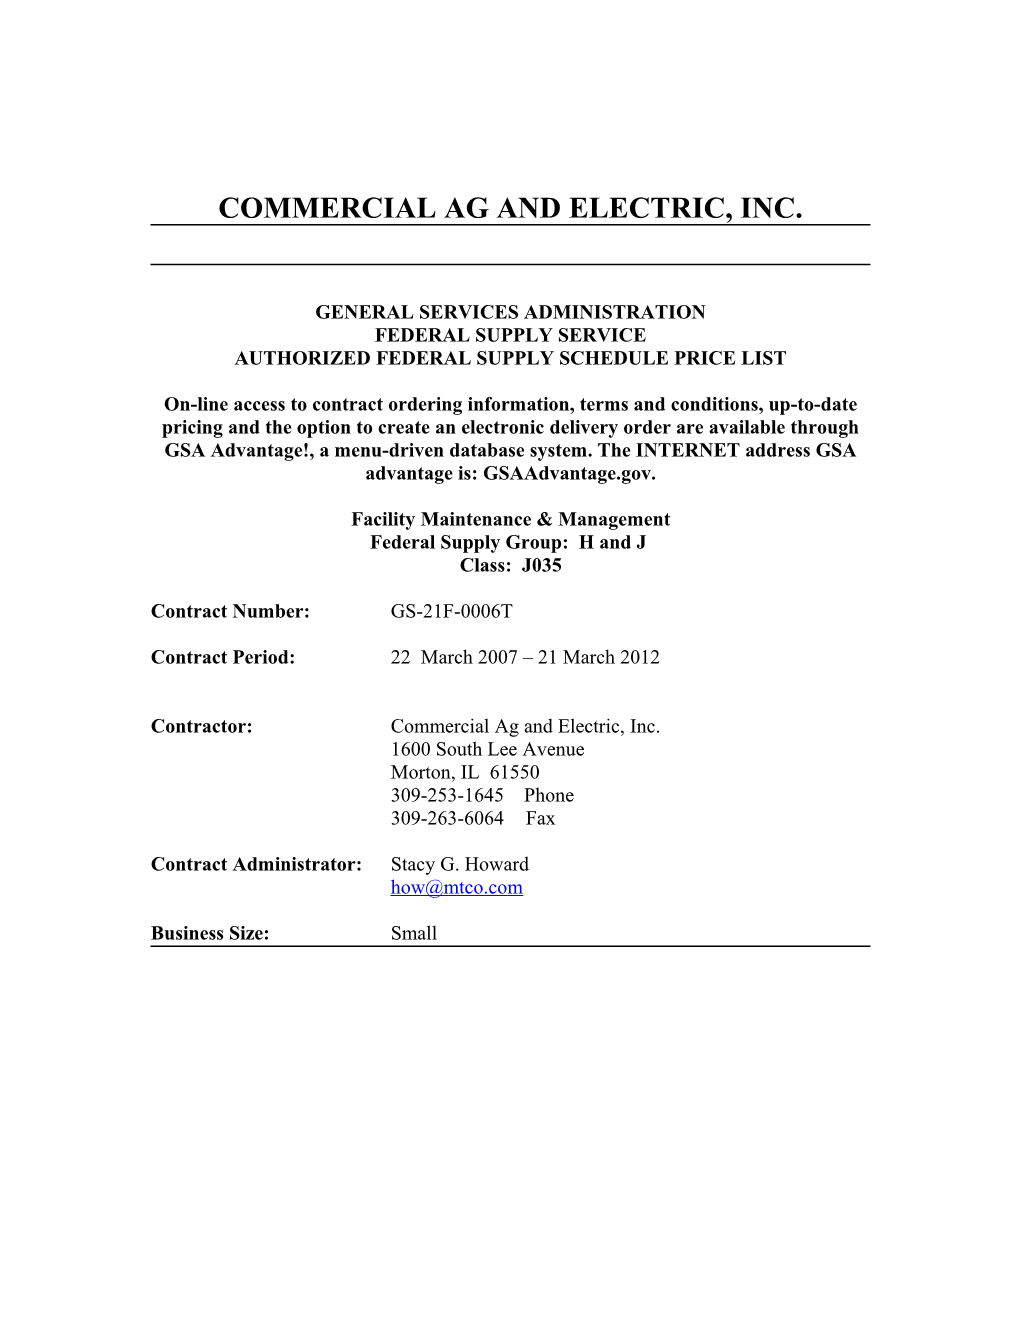 Commercial Ag and Electric, Inc